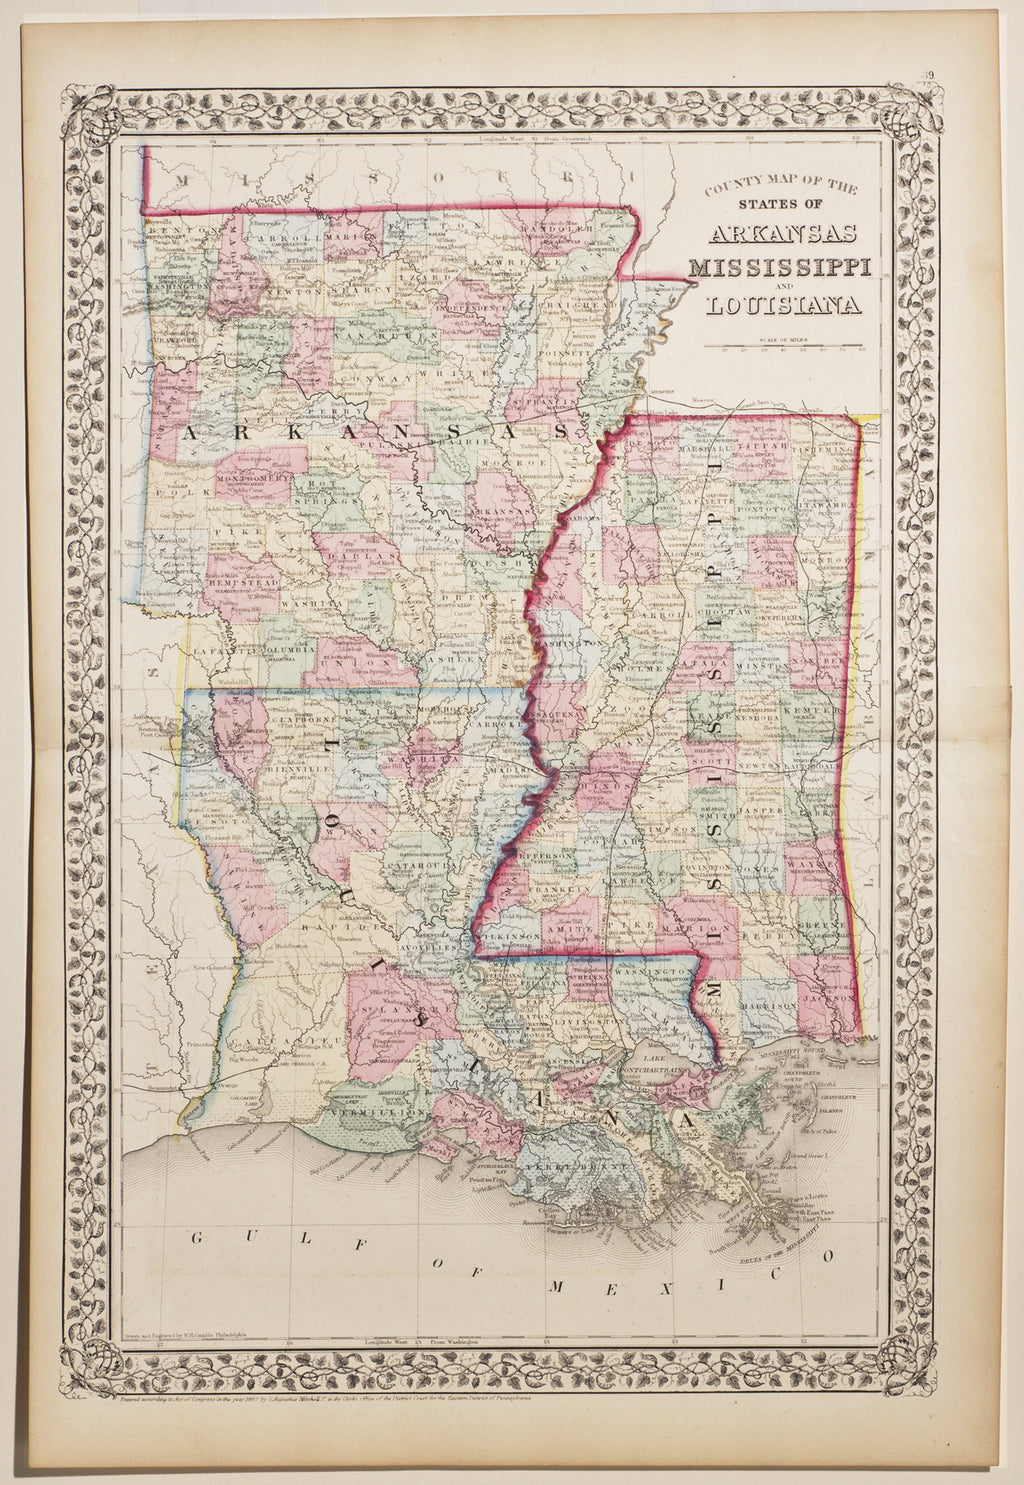 File:1864 Mitchell Map of Louisiana, Mississippi and Arkansas